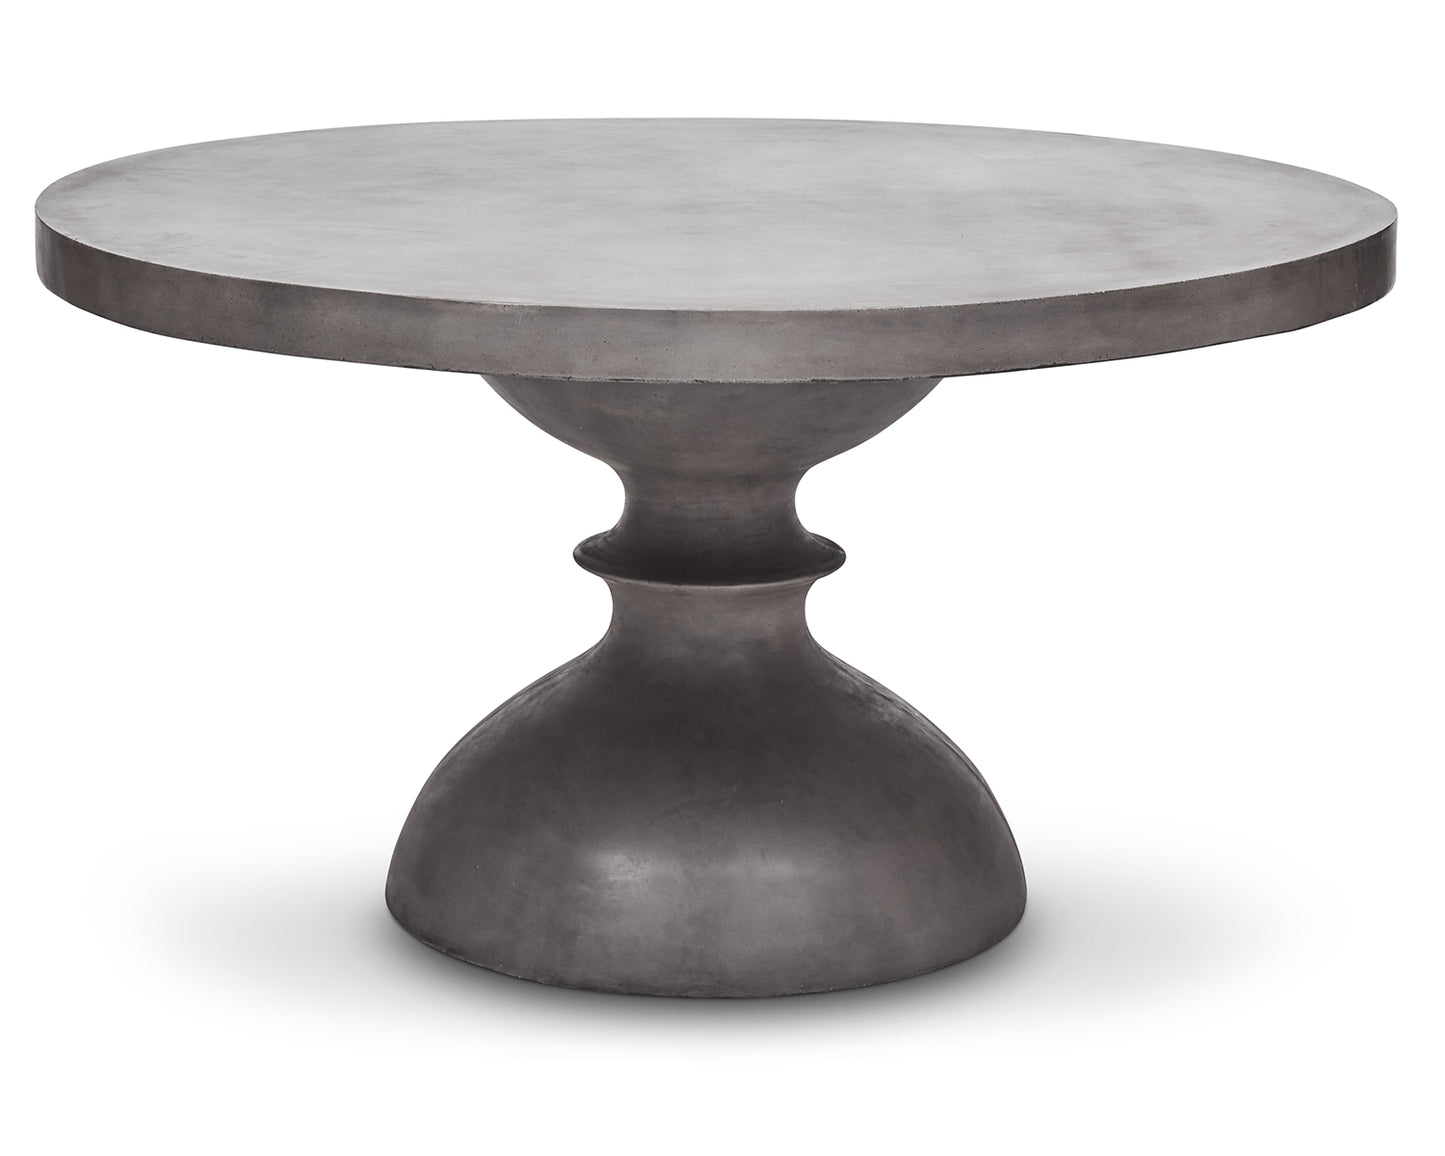 Load image into Gallery viewer, Spindle Dining Table Dining Table Urbia     Four Hands, Burke Decor, Mid Century Modern Furniture, Old Bones Furniture Company, Old Bones Co, Modern Mid Century, Designer Furniture, https://www.oldbonesco.com/
